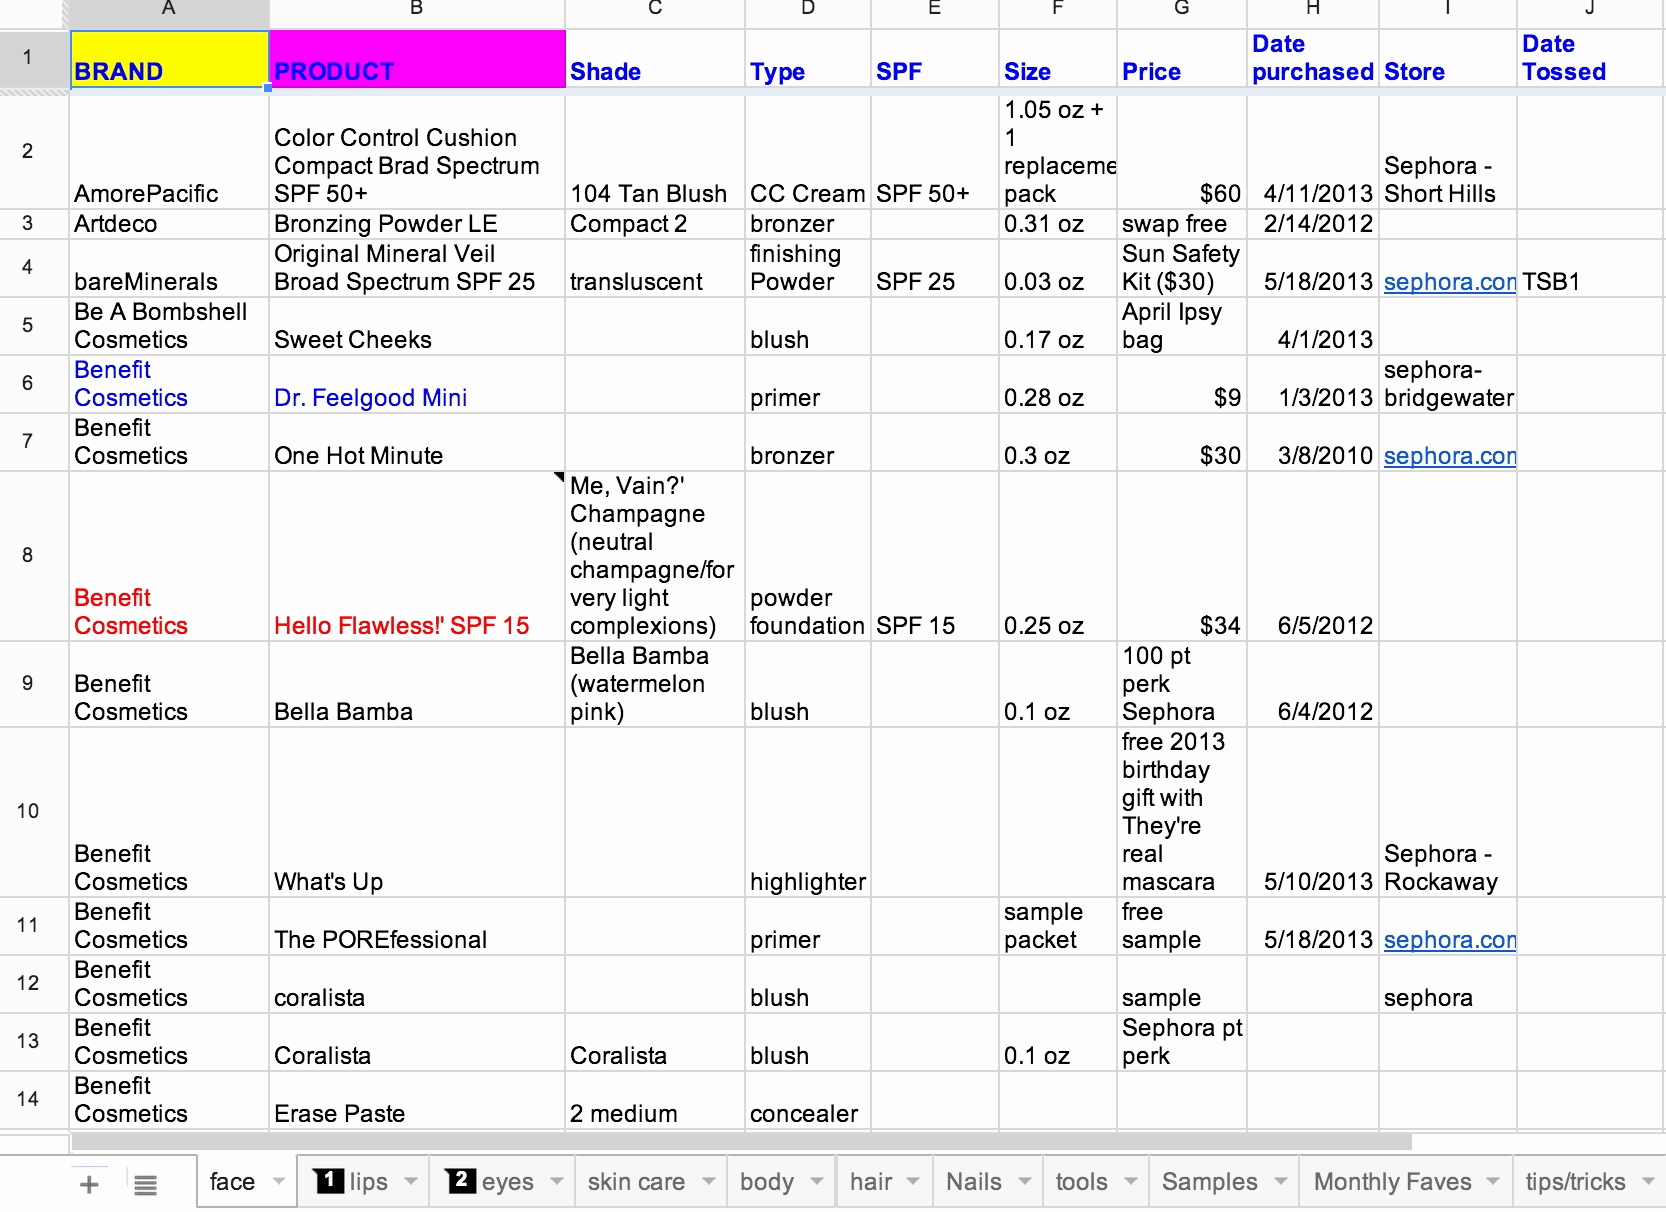 Makeup Inventory Spreadsheet Awesome Makeup Inventory Spreadsheet Within Makeup Inventory Spreadsheet